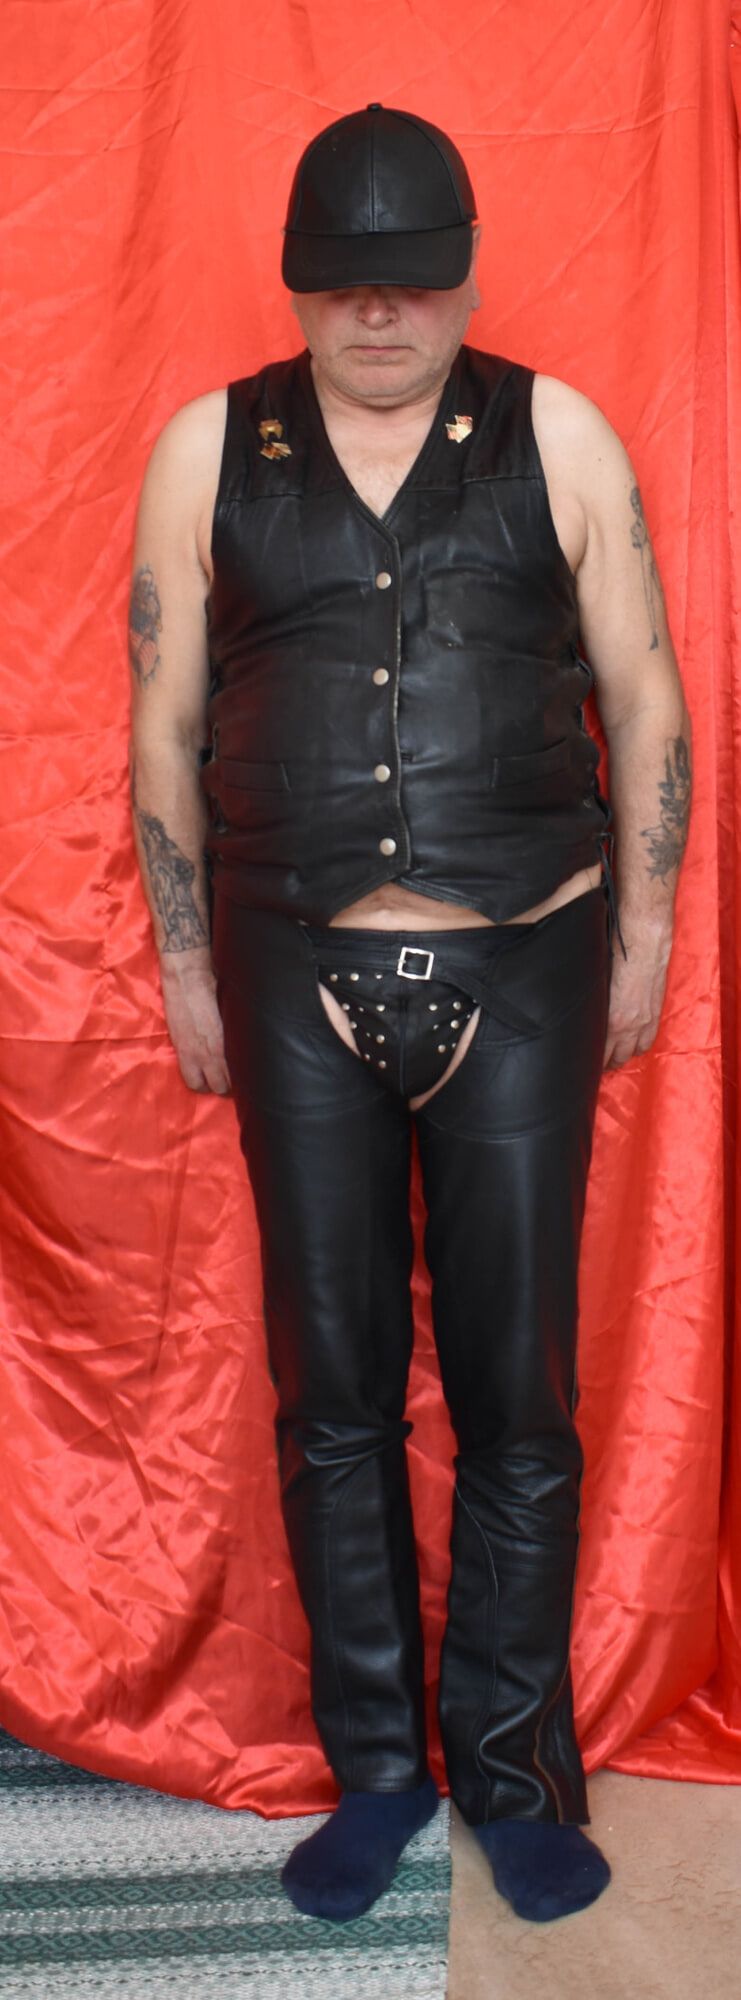 AM TO WEAR ME IN SEXY HOT LEATHER CHAPS. #11